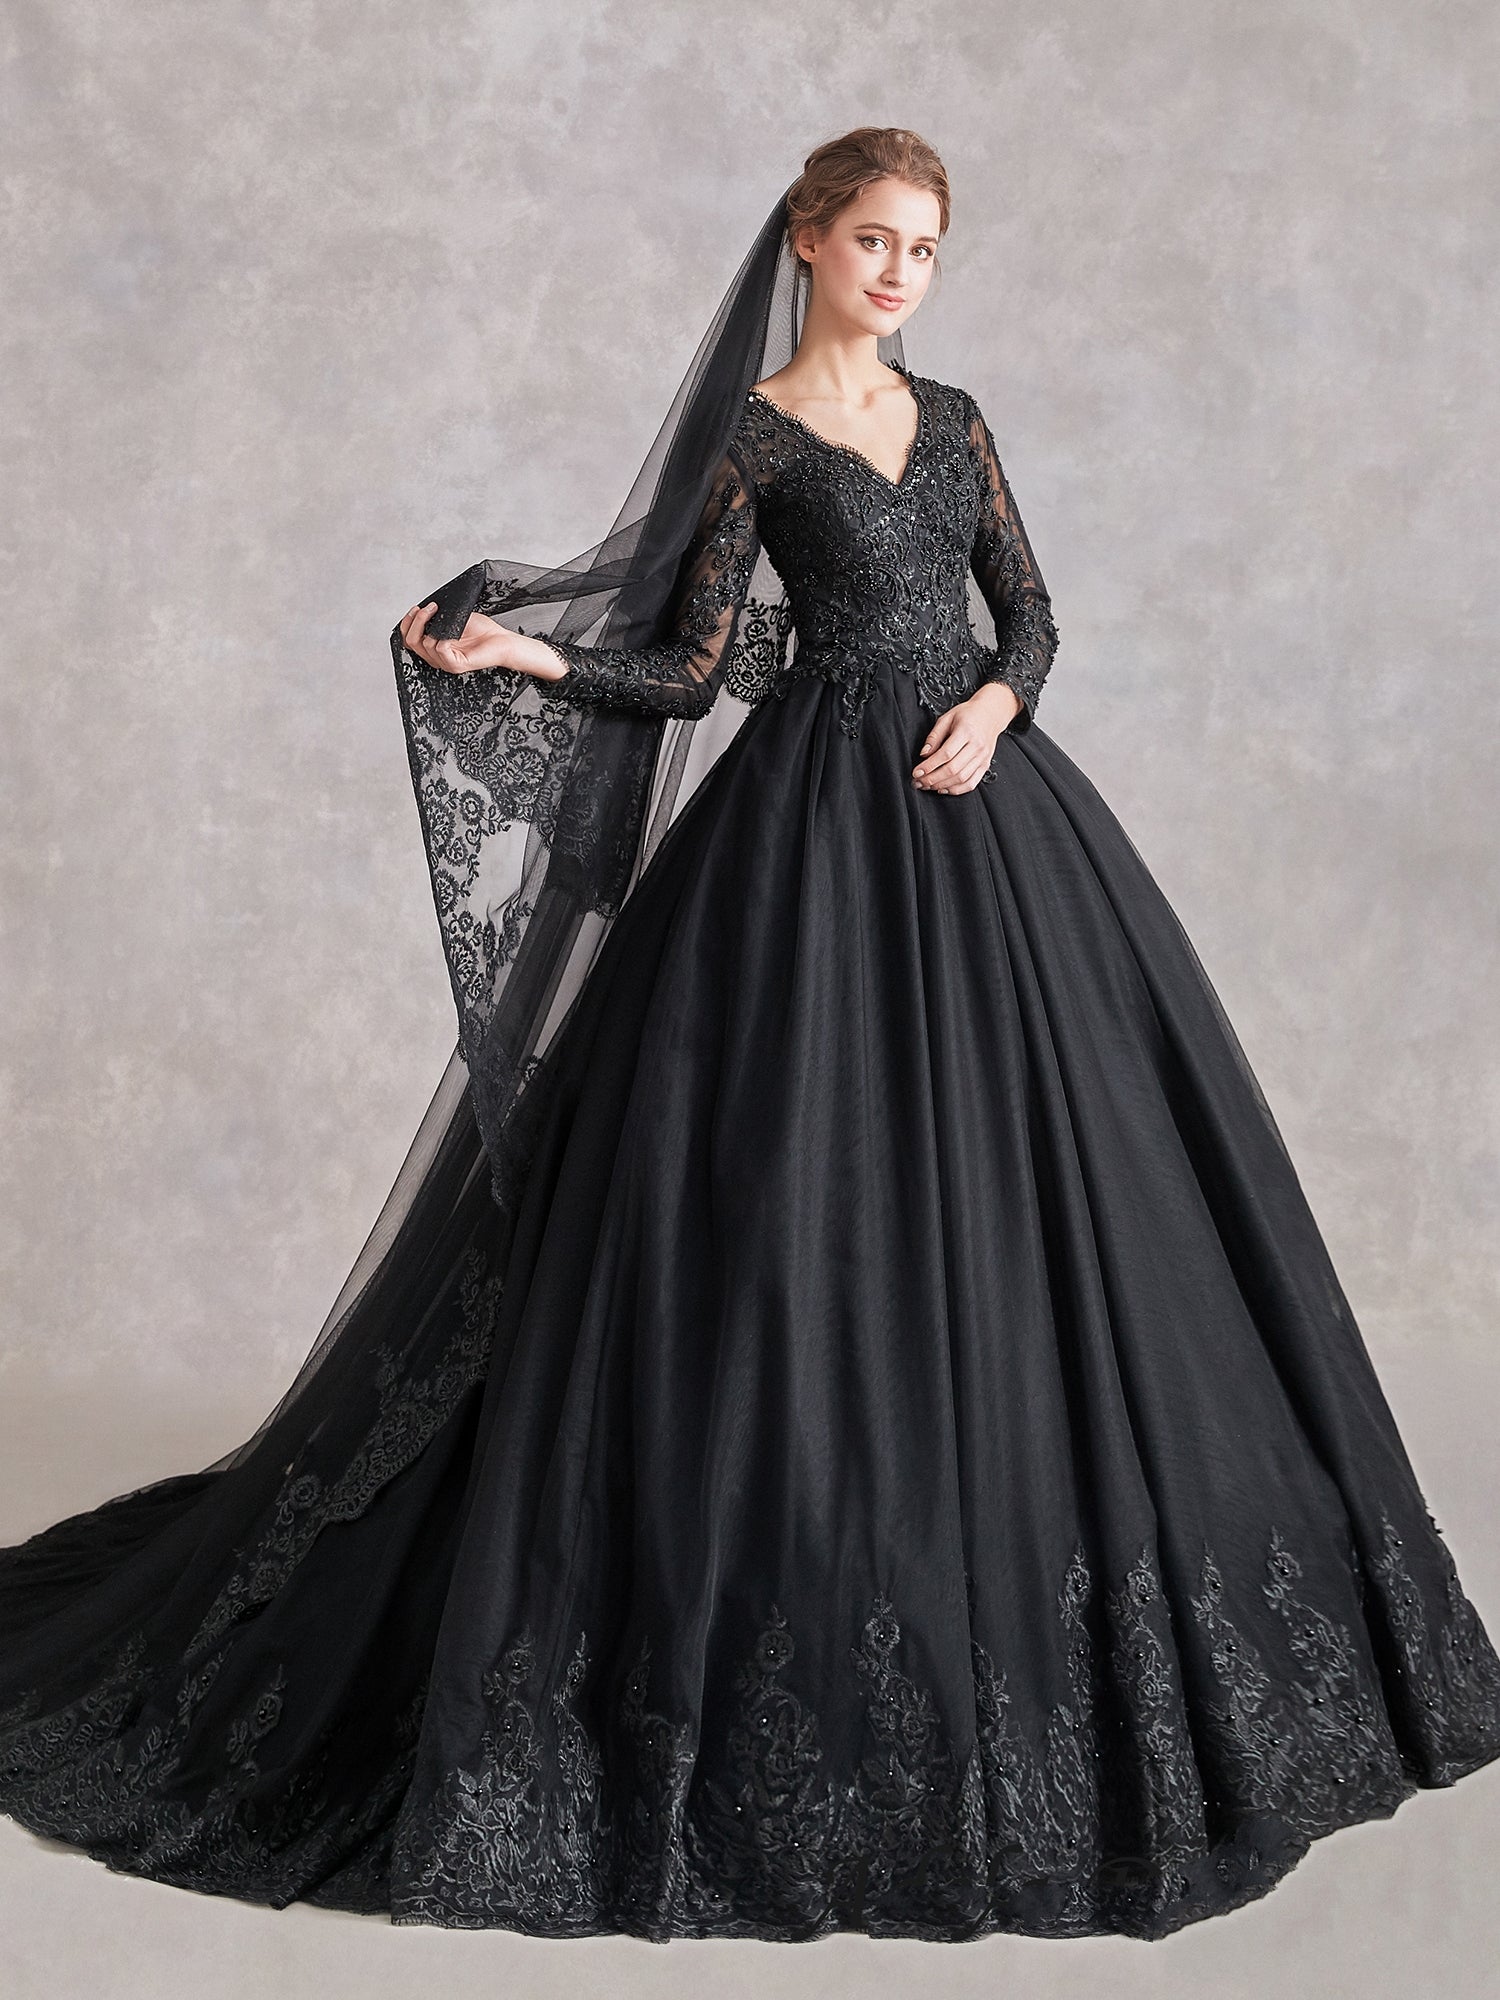 Black Gothic Wedding Dresses with Long Sleeve V Neck Lace Backless Bridal  Gowns | eBay